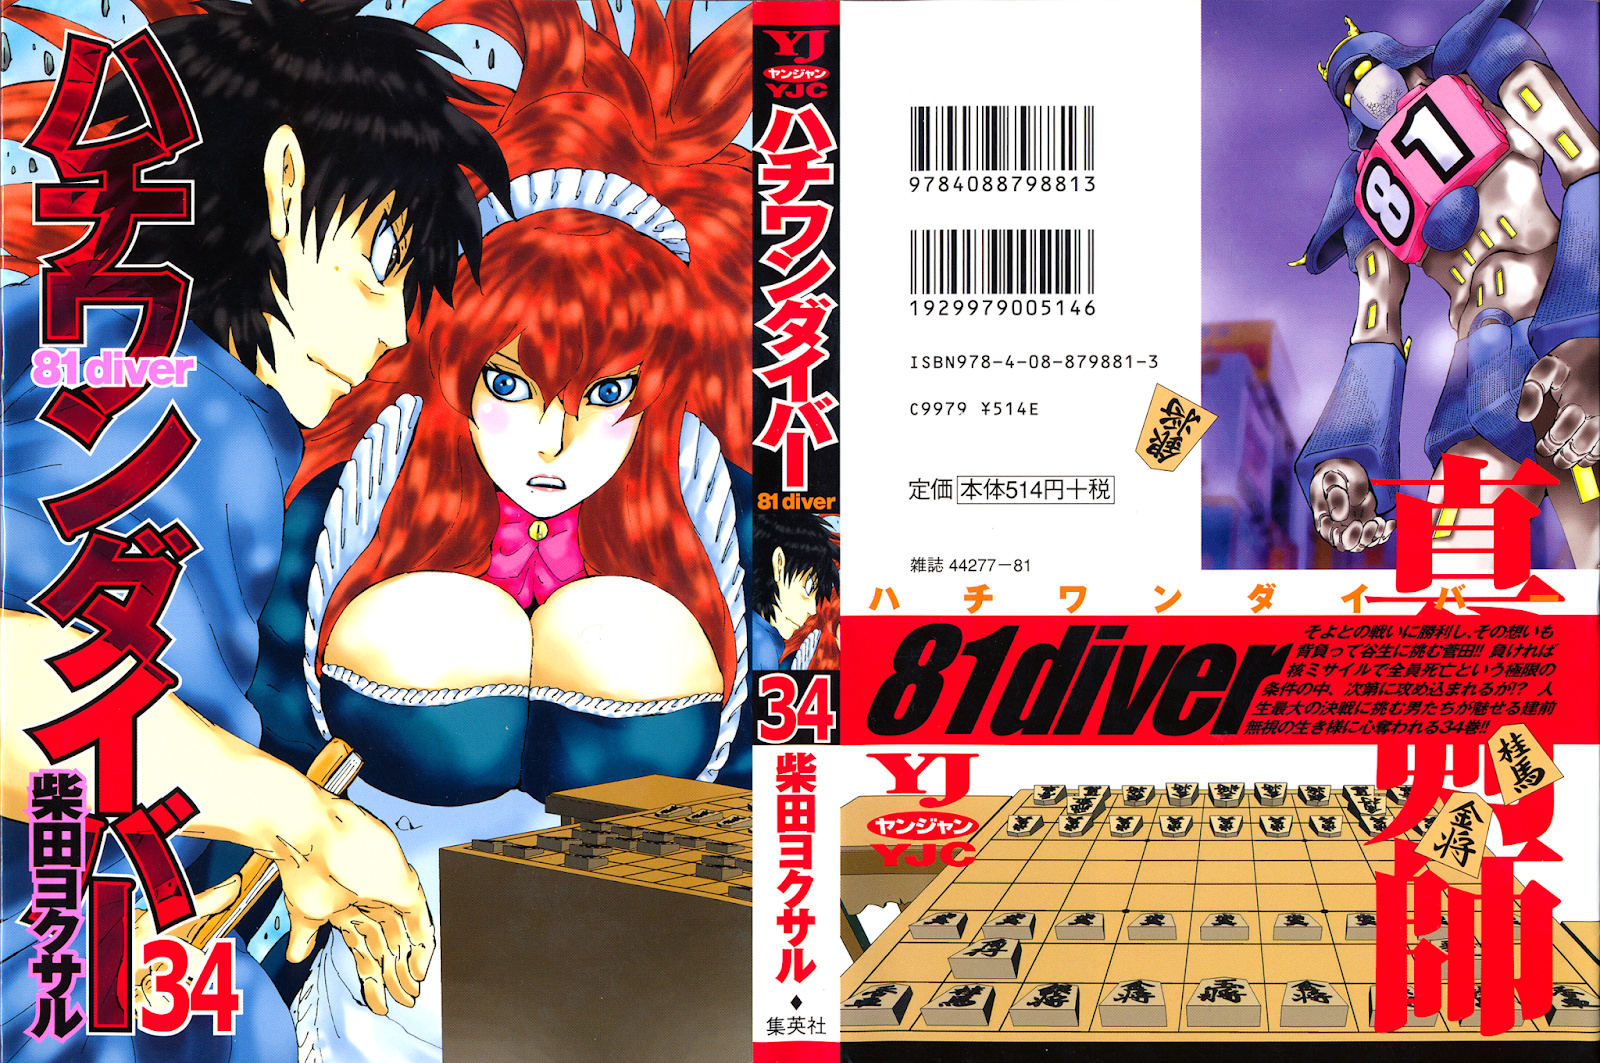 81 Diver Chapter 354 #1